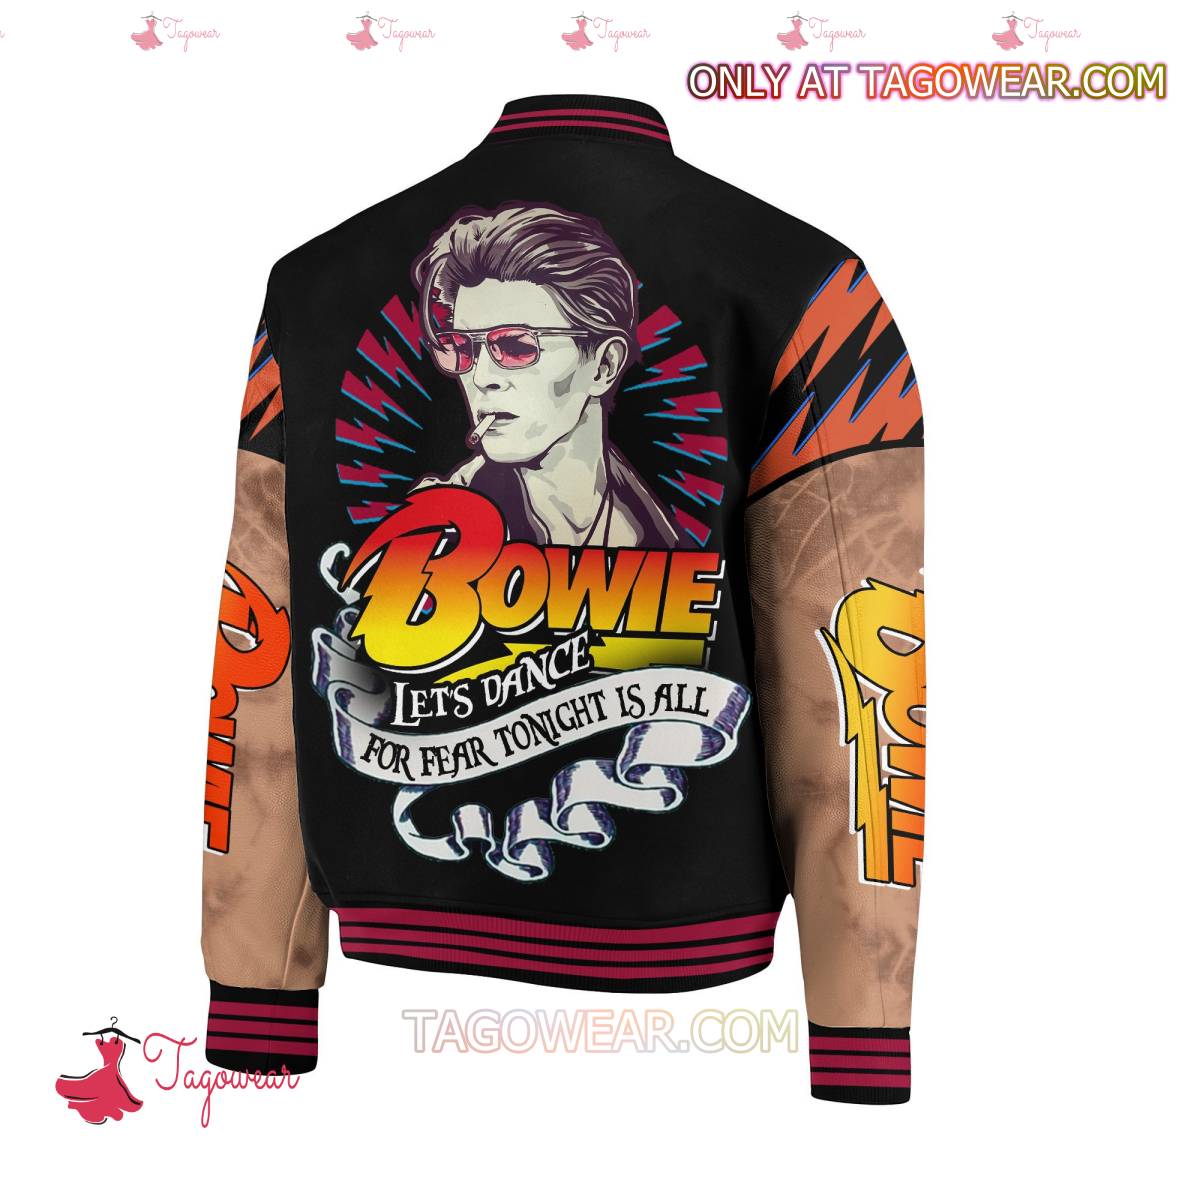 David Bowie Let's Dance For Fear Tonight Is All Baseball Jacket b